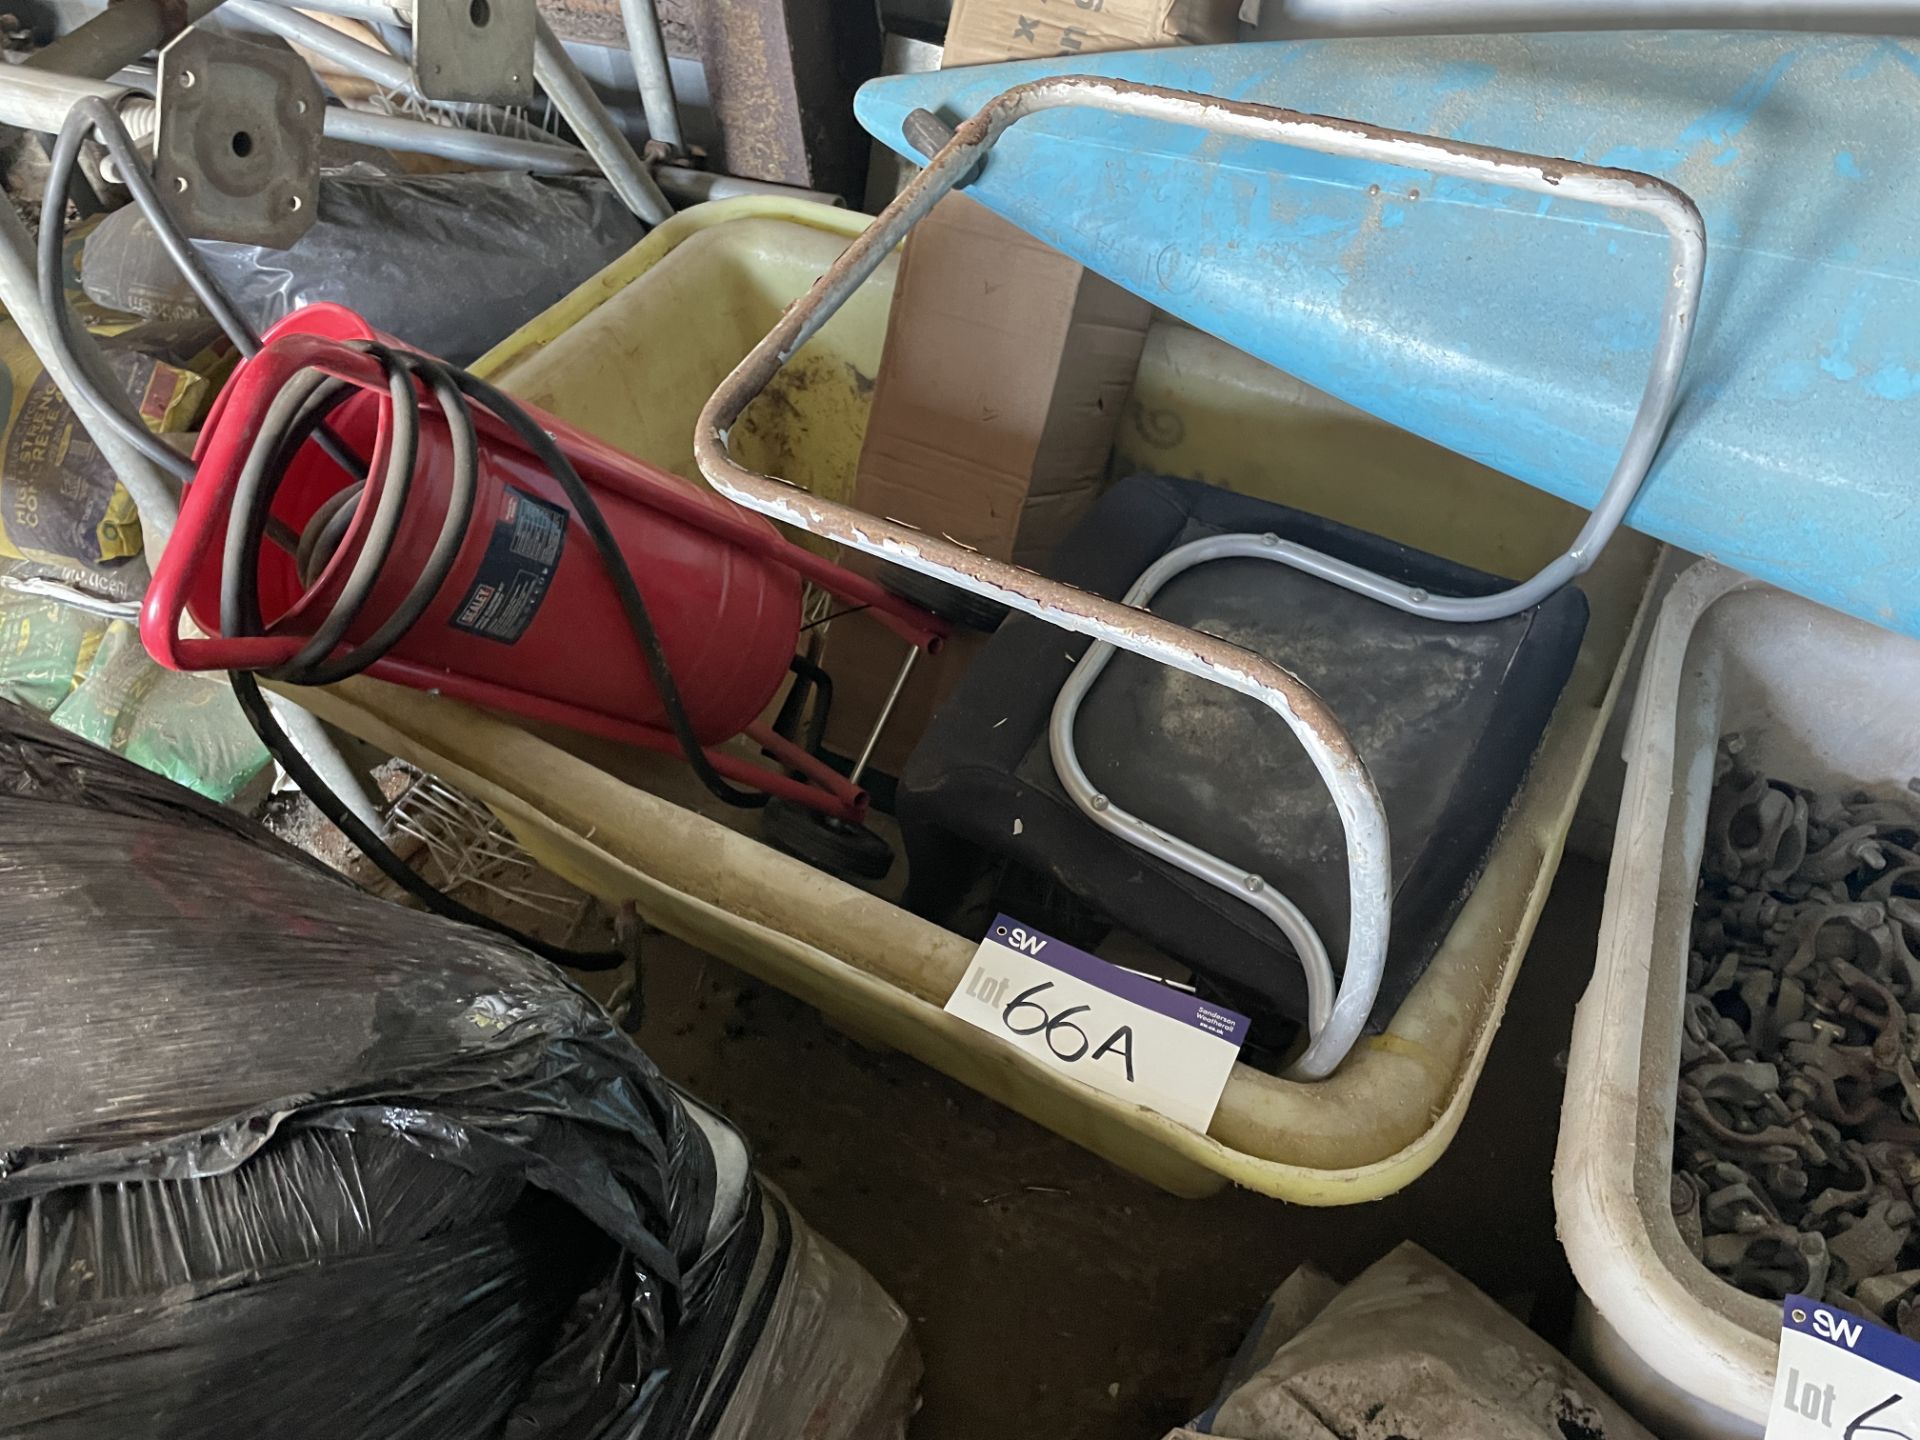 Plastic Mortar Tub, with contents including space heater and chair Please read the following